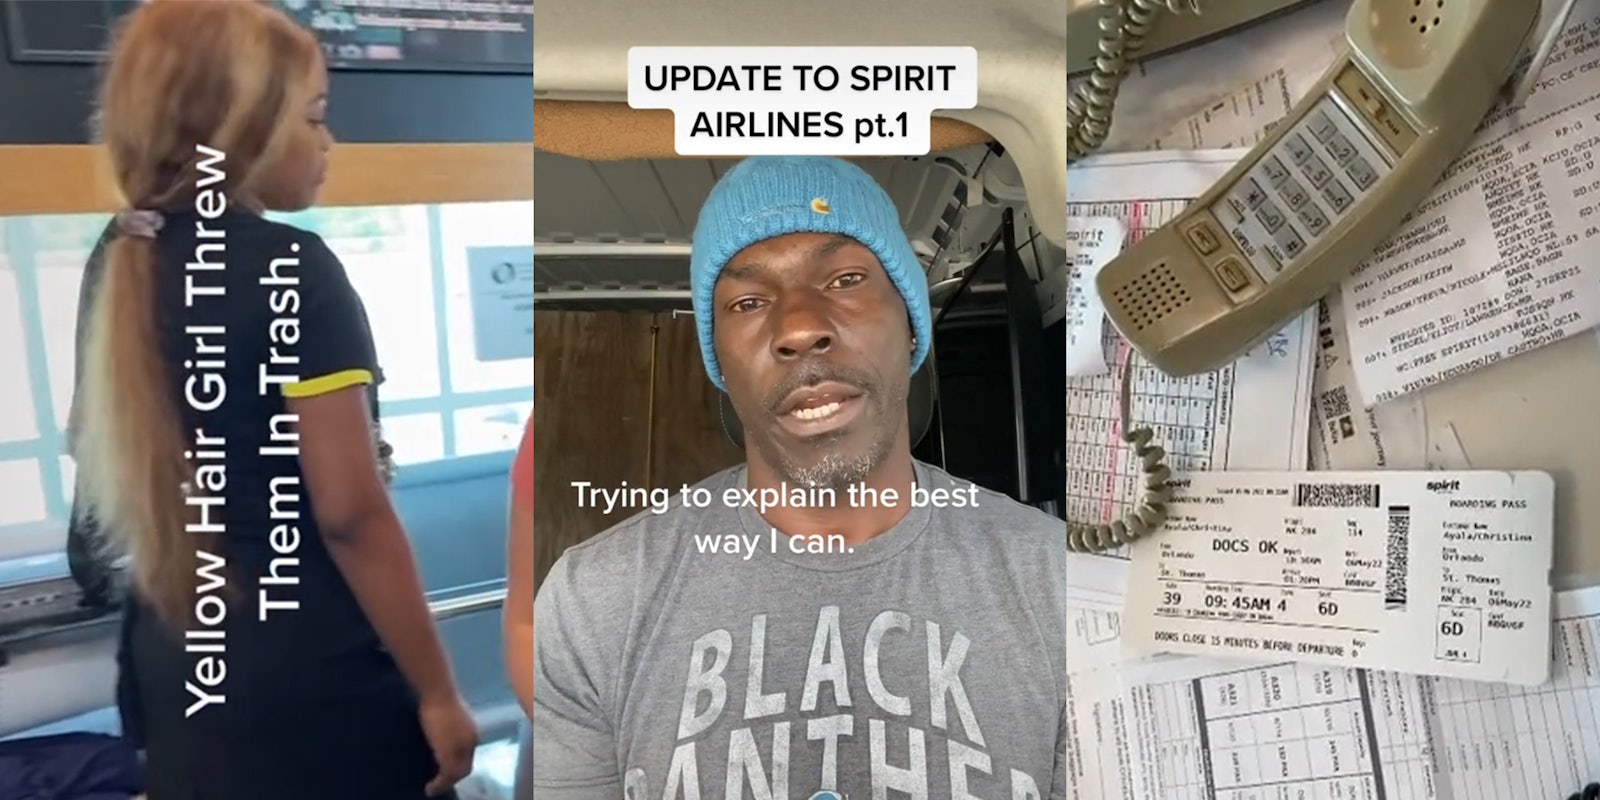 airline employee with caption 'yellow hair girl threw them in trash' (l) man in blue had and black panther t-shirt with captions 'update to spirit airlines pt.1' and 'trying to explain the best way I can' (c) phone off hook with boarding pass on desk (r)